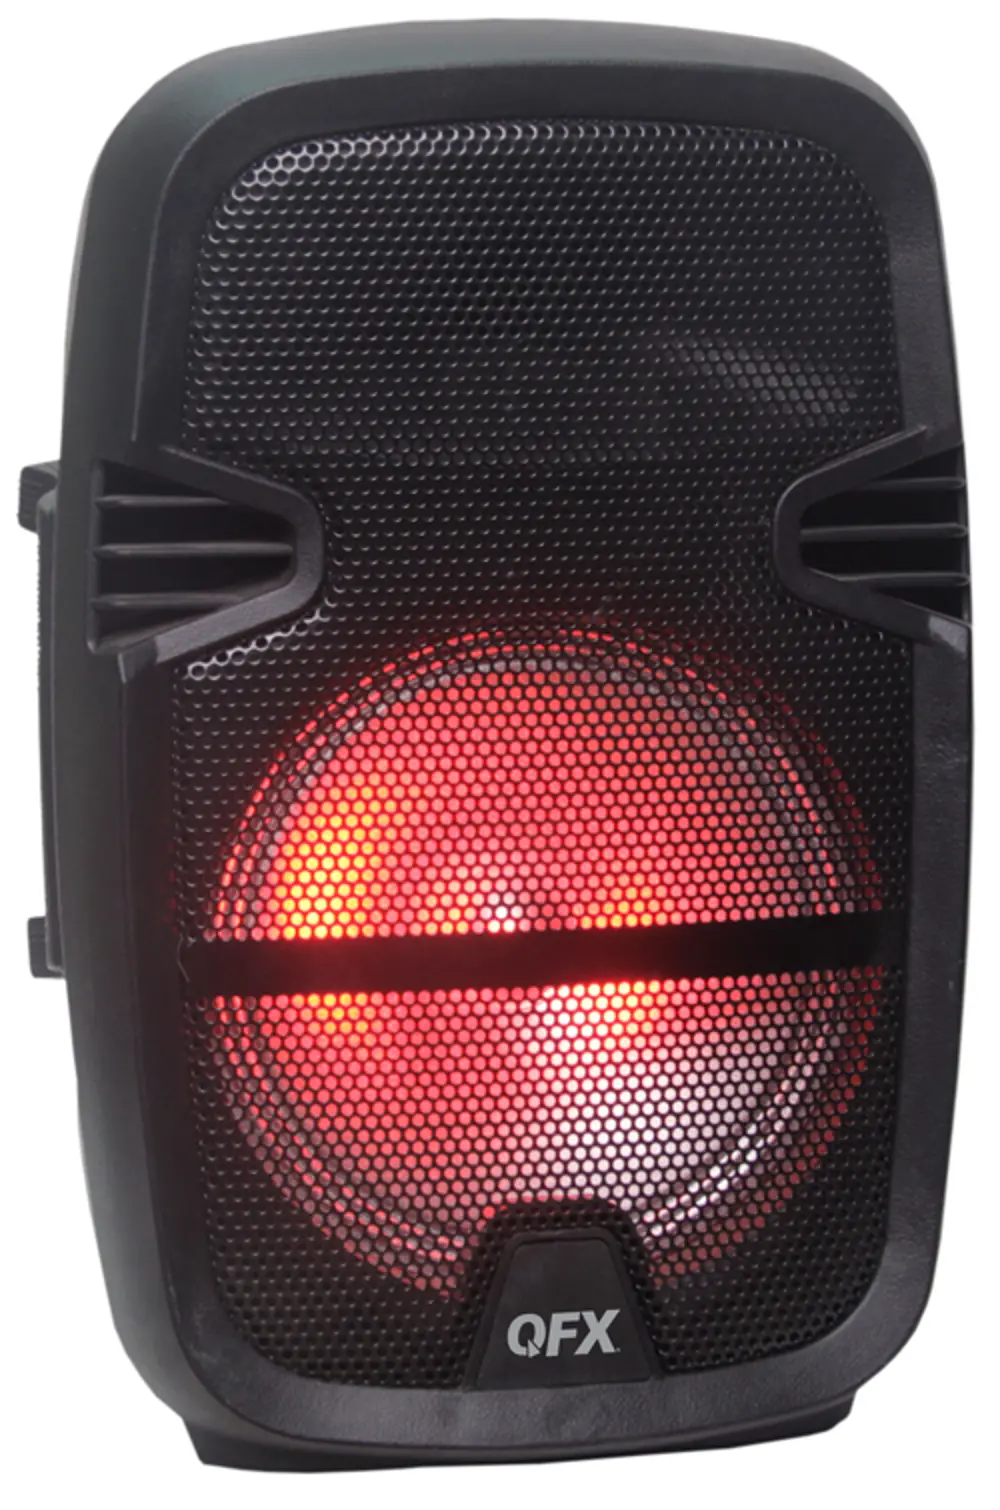 Battery Powered Portable Bluetooth Party Speaker -1